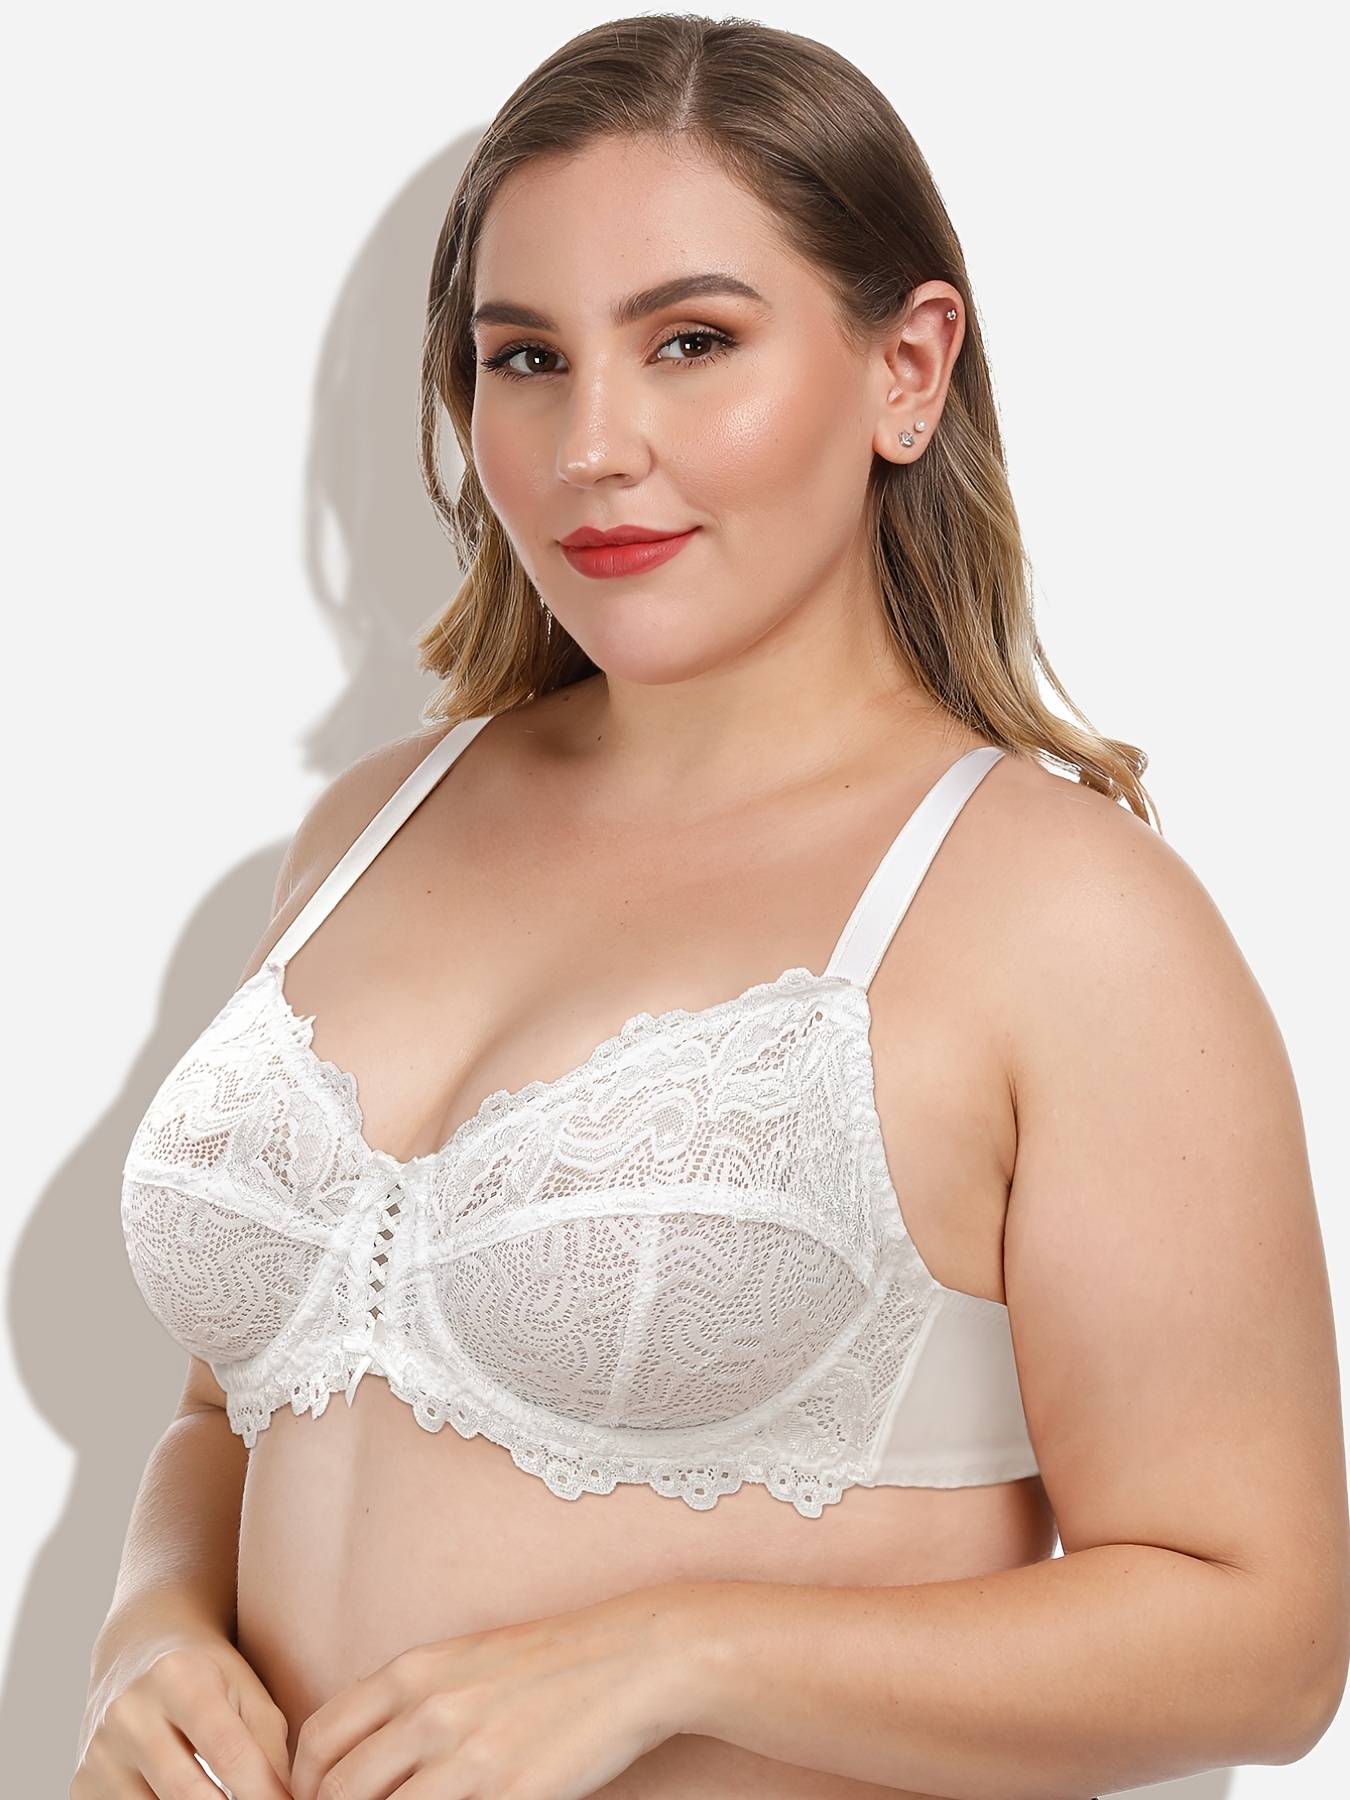 Womens Plus Size Bras Full Coverage Lace Underwire Unlined Bra White 38B